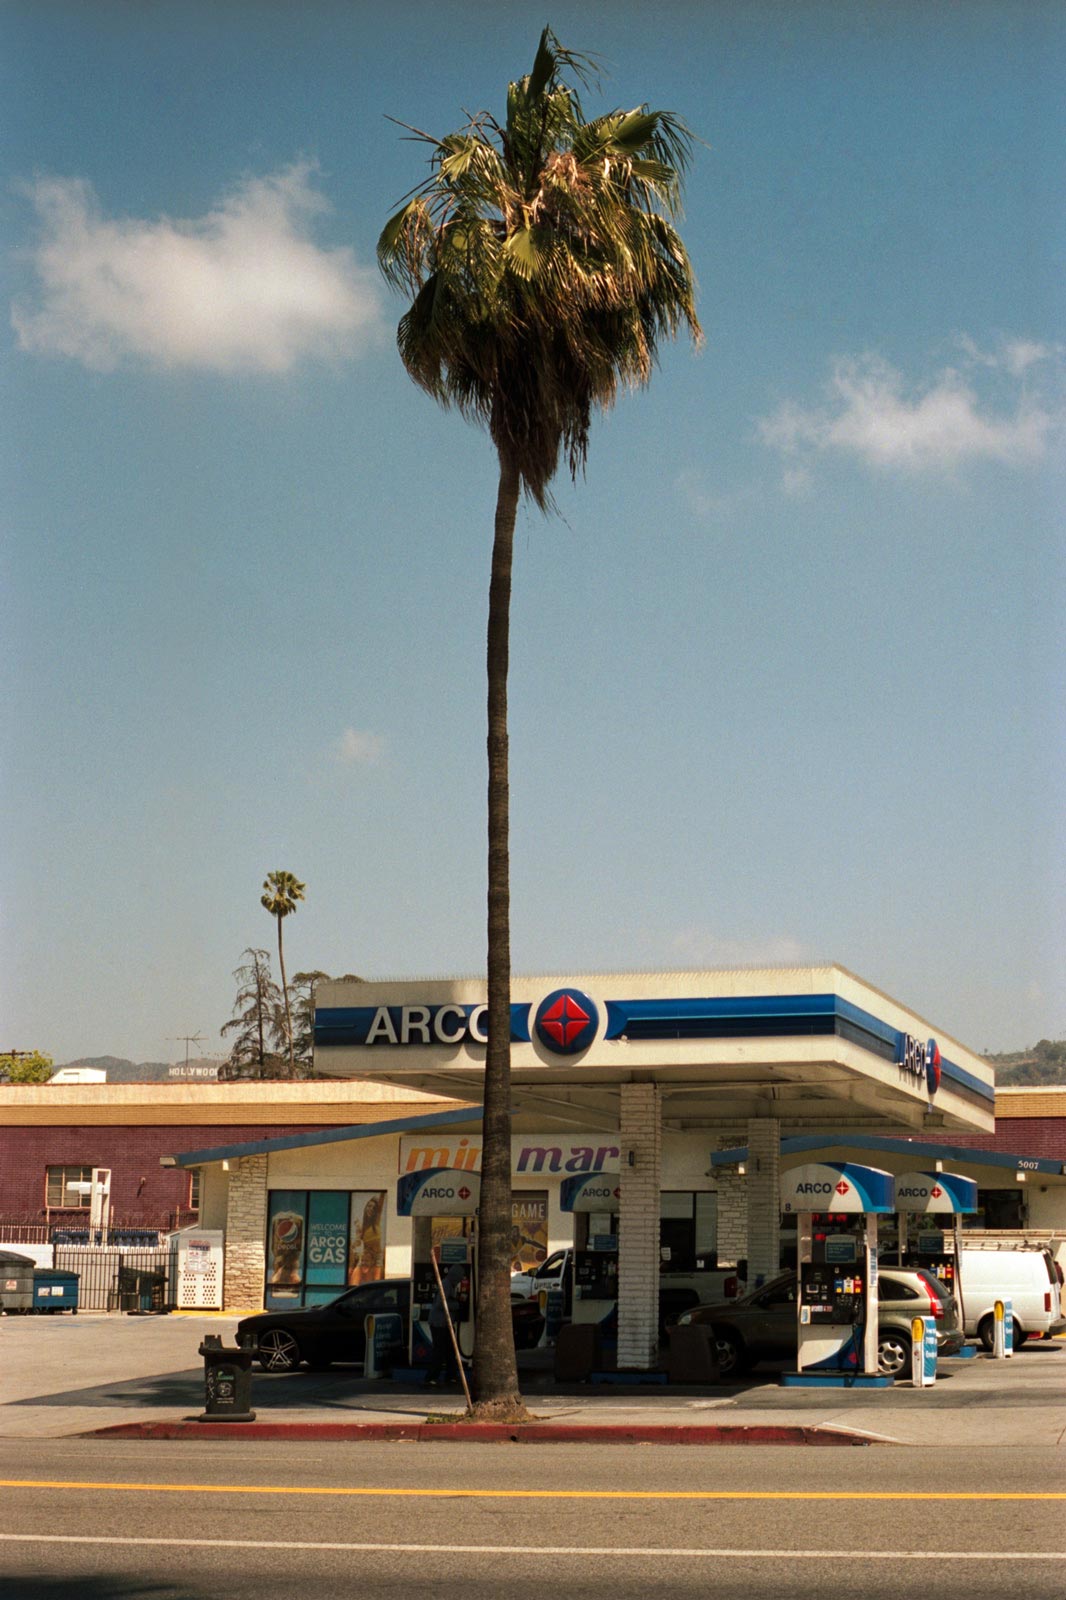 Tall palm tree outside Arco gas station, Los Angeles.